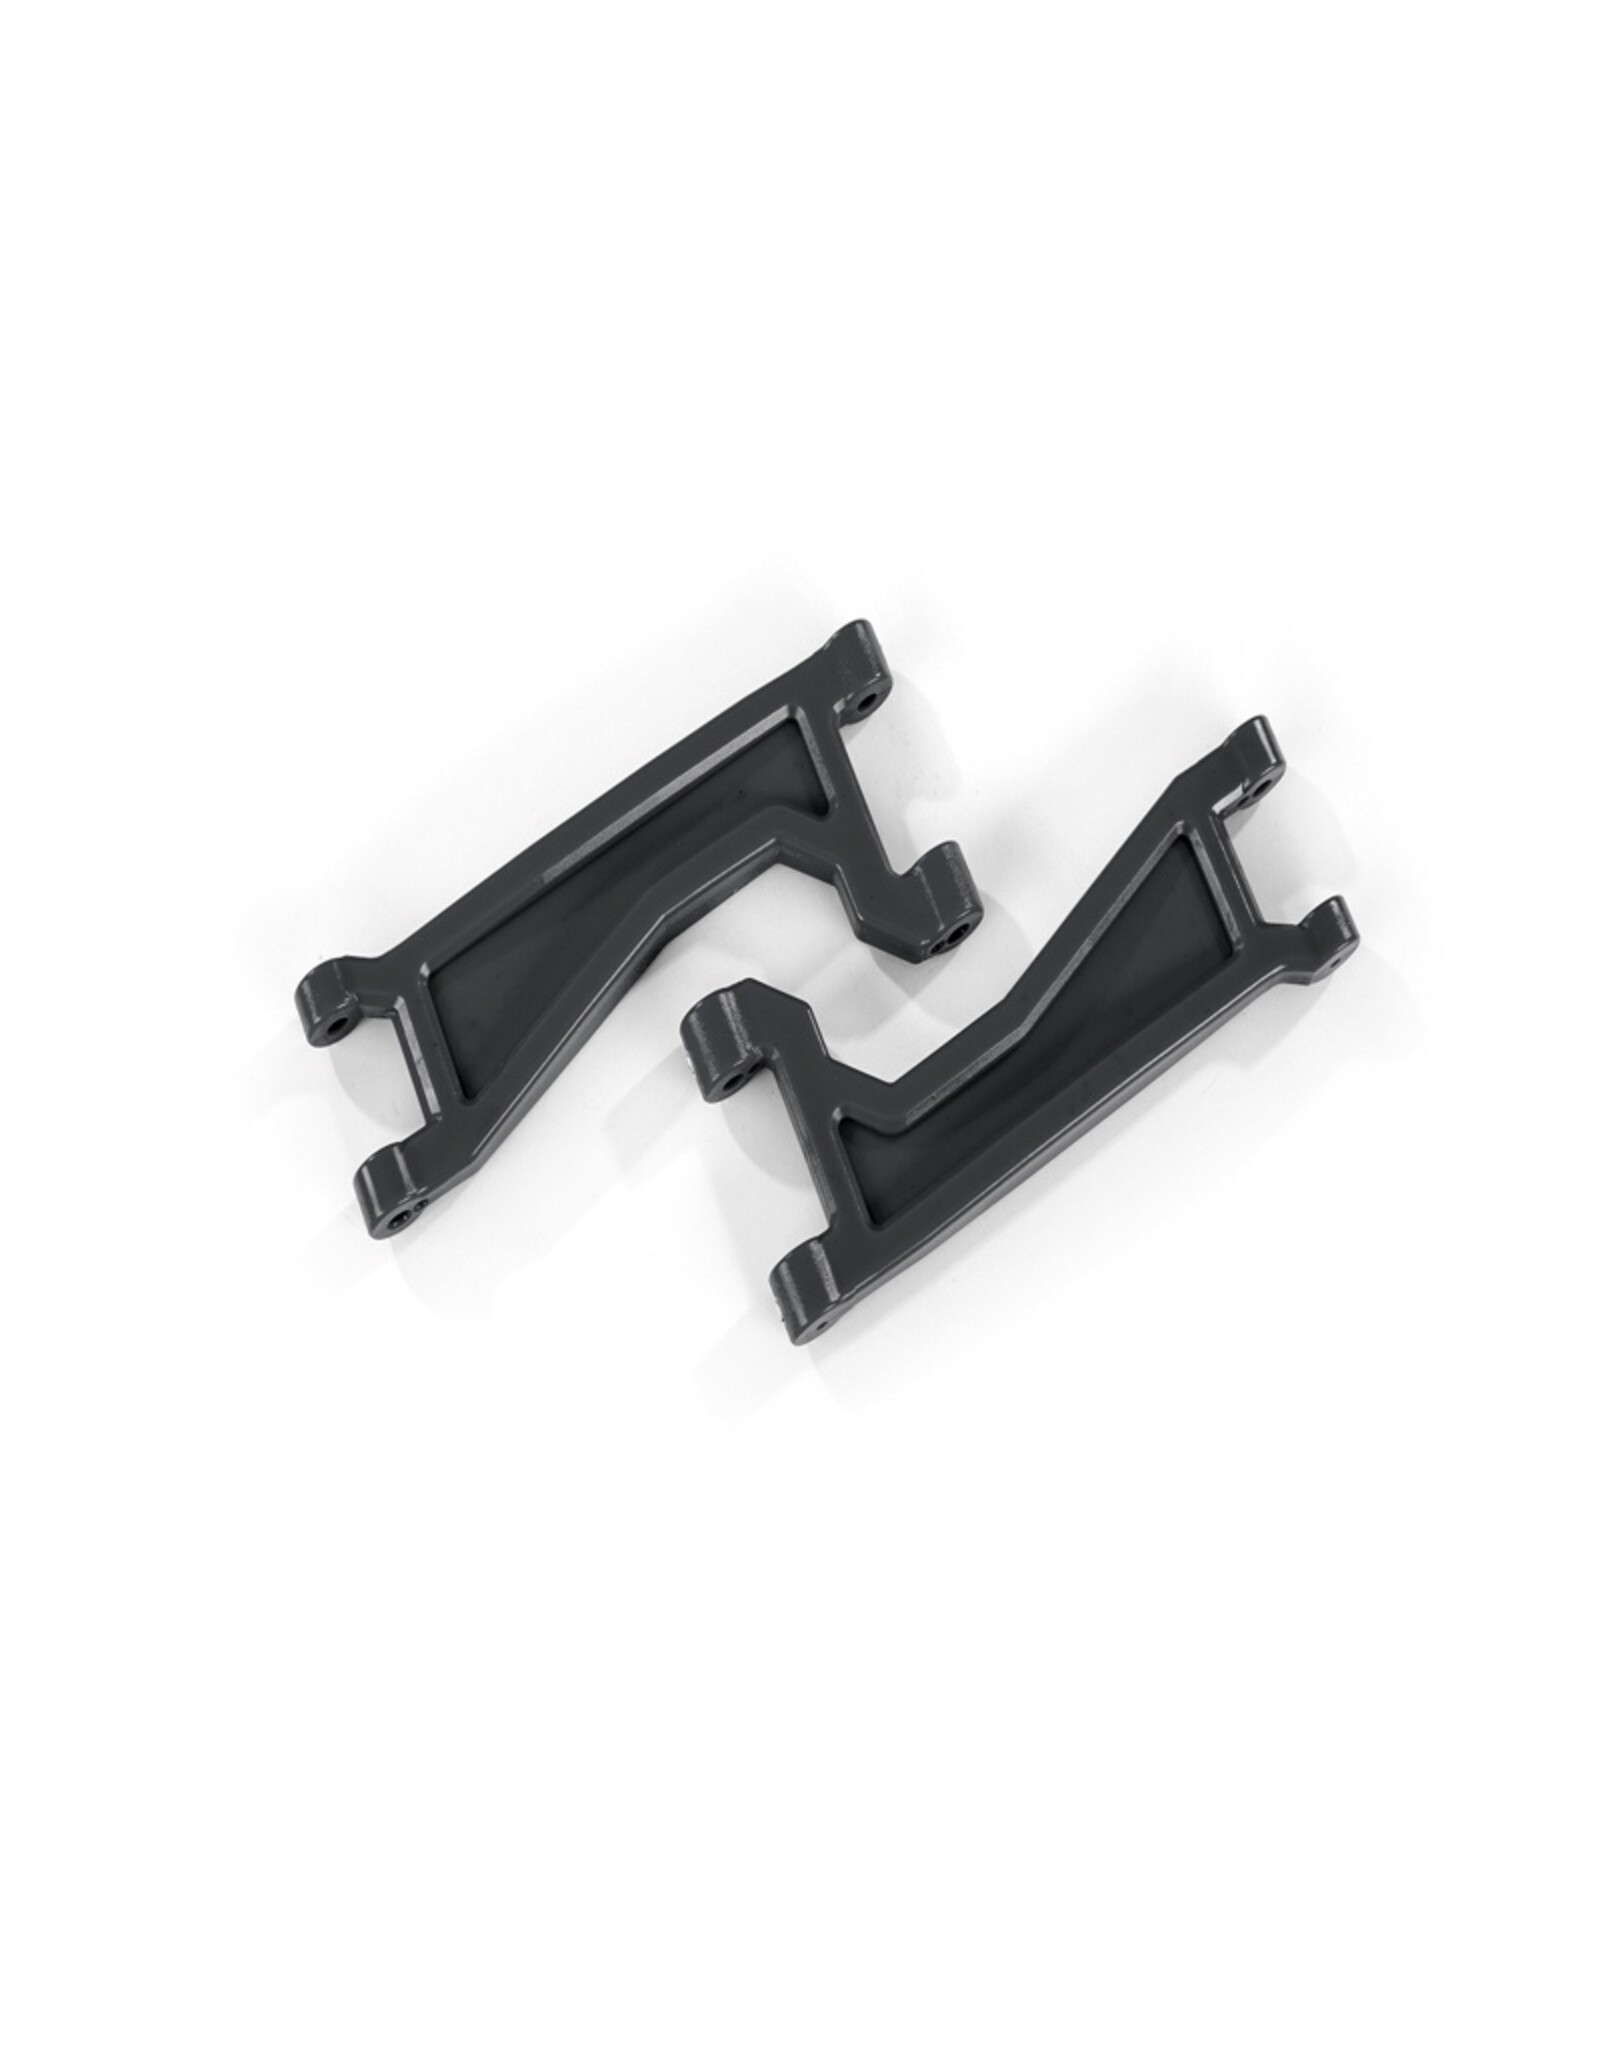 Traxxas TRA8998 Suspension arms, upper, black (left or right, front or rear) (2)